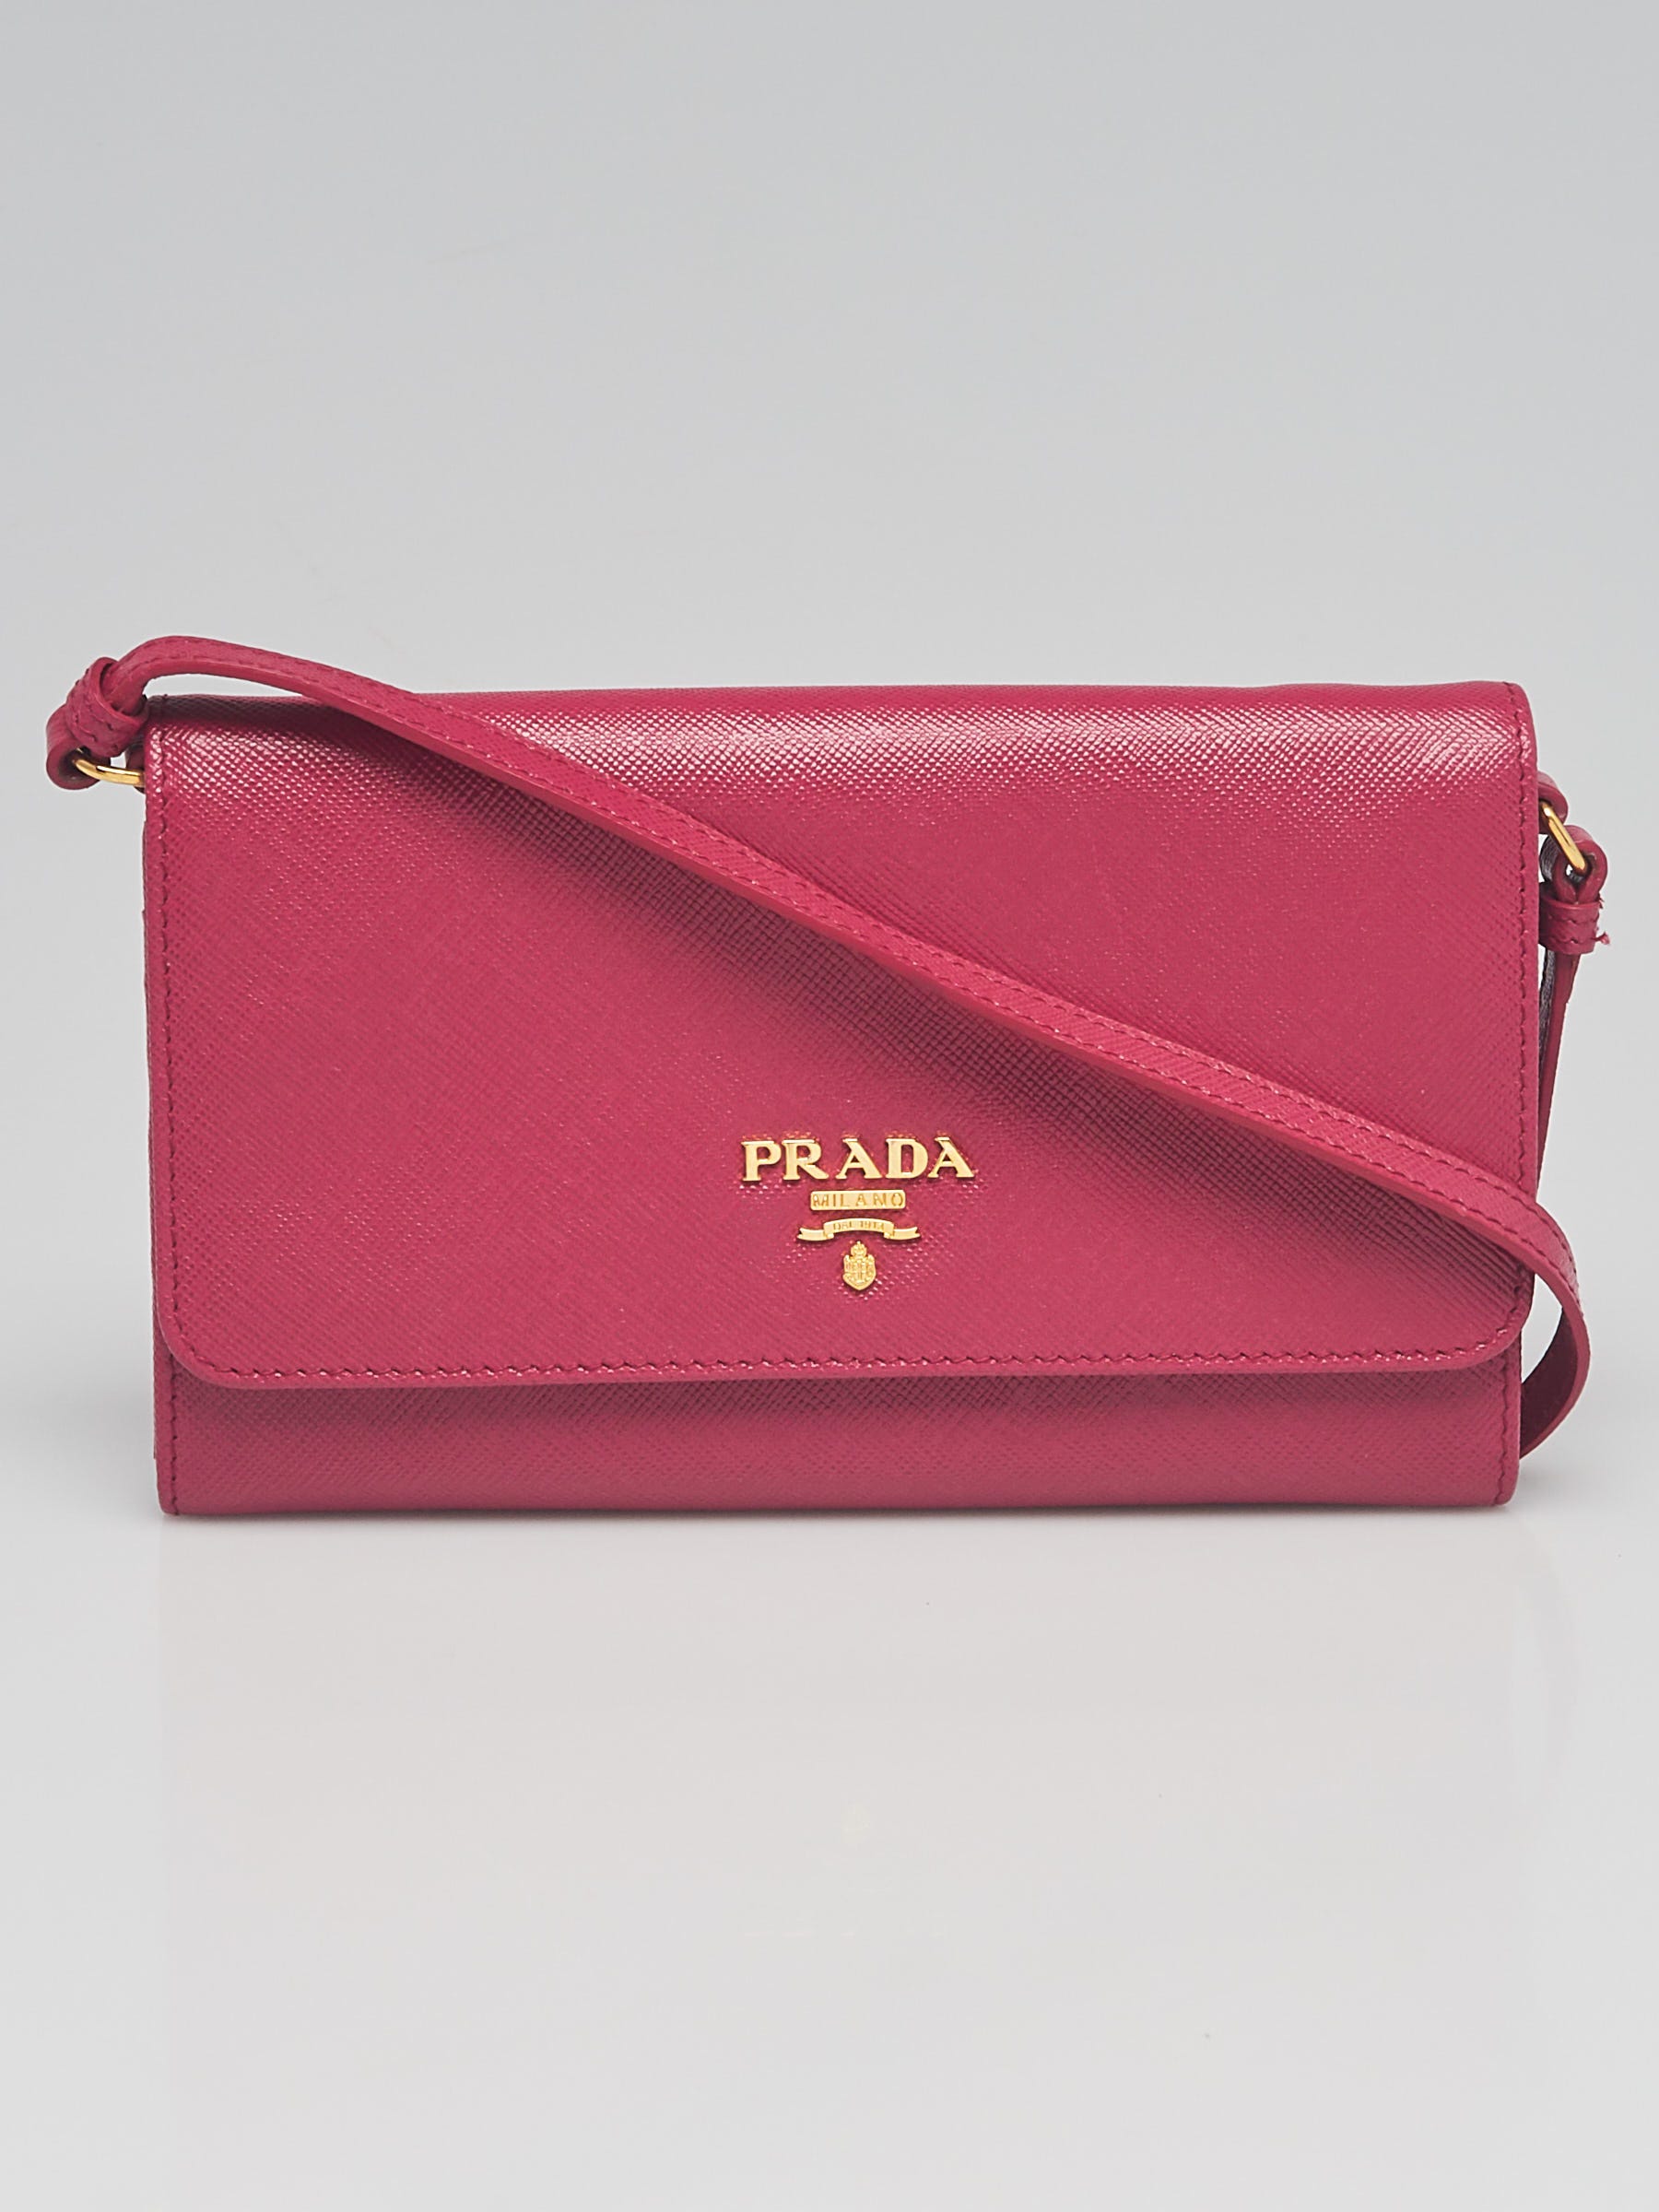 Prada Fiery Red Saffiano and leather wallet with shoulder strap